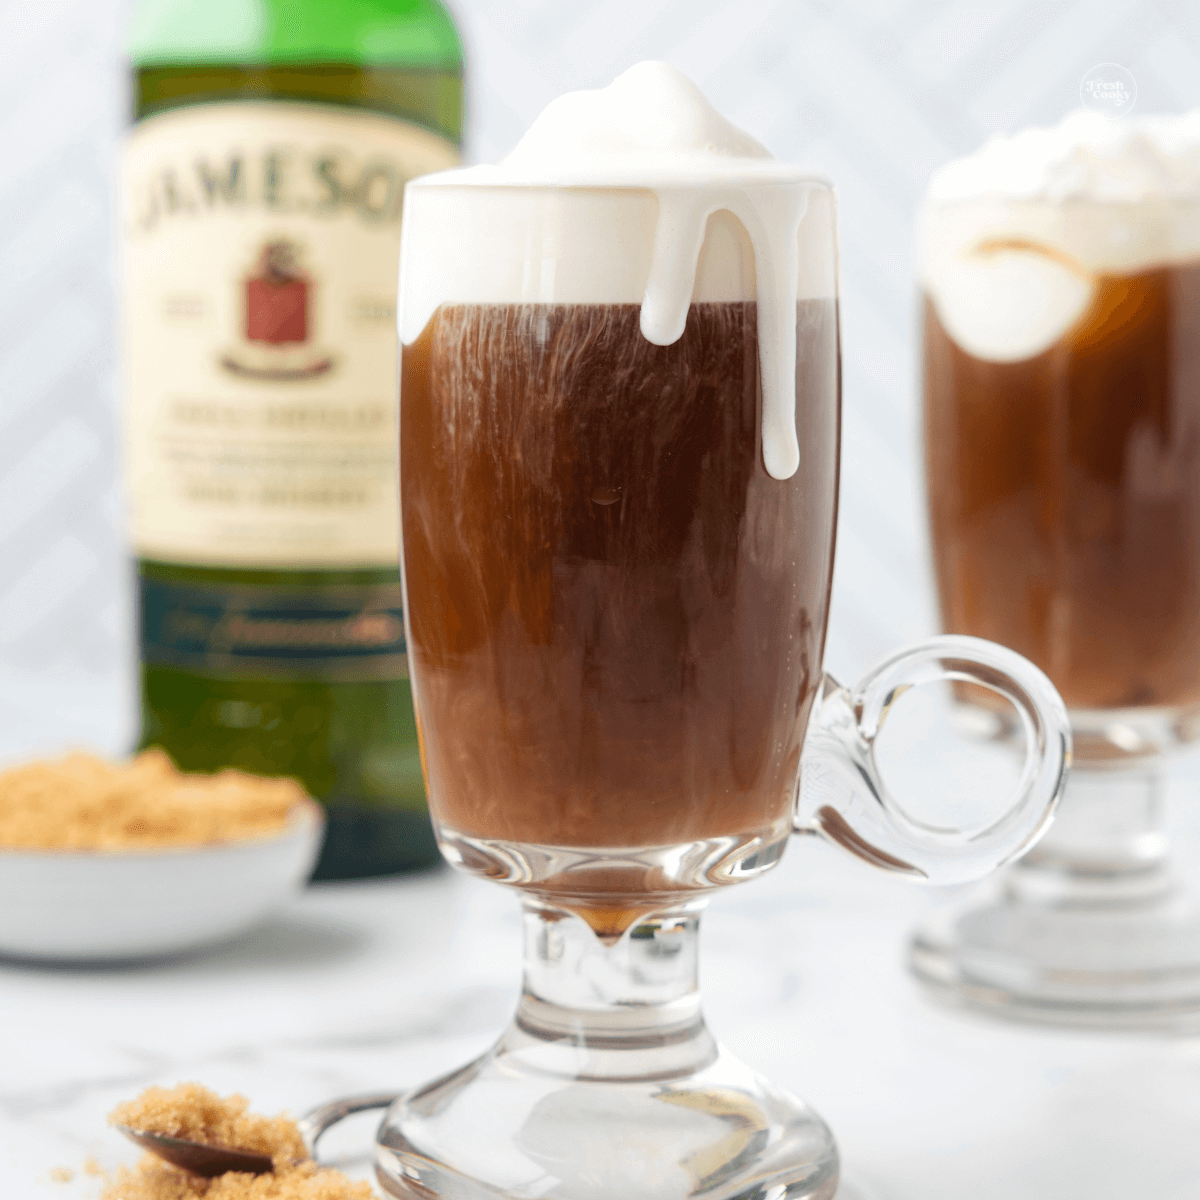 Irish coffee in clear coffee mug with Jameson whiskey bottle in background.